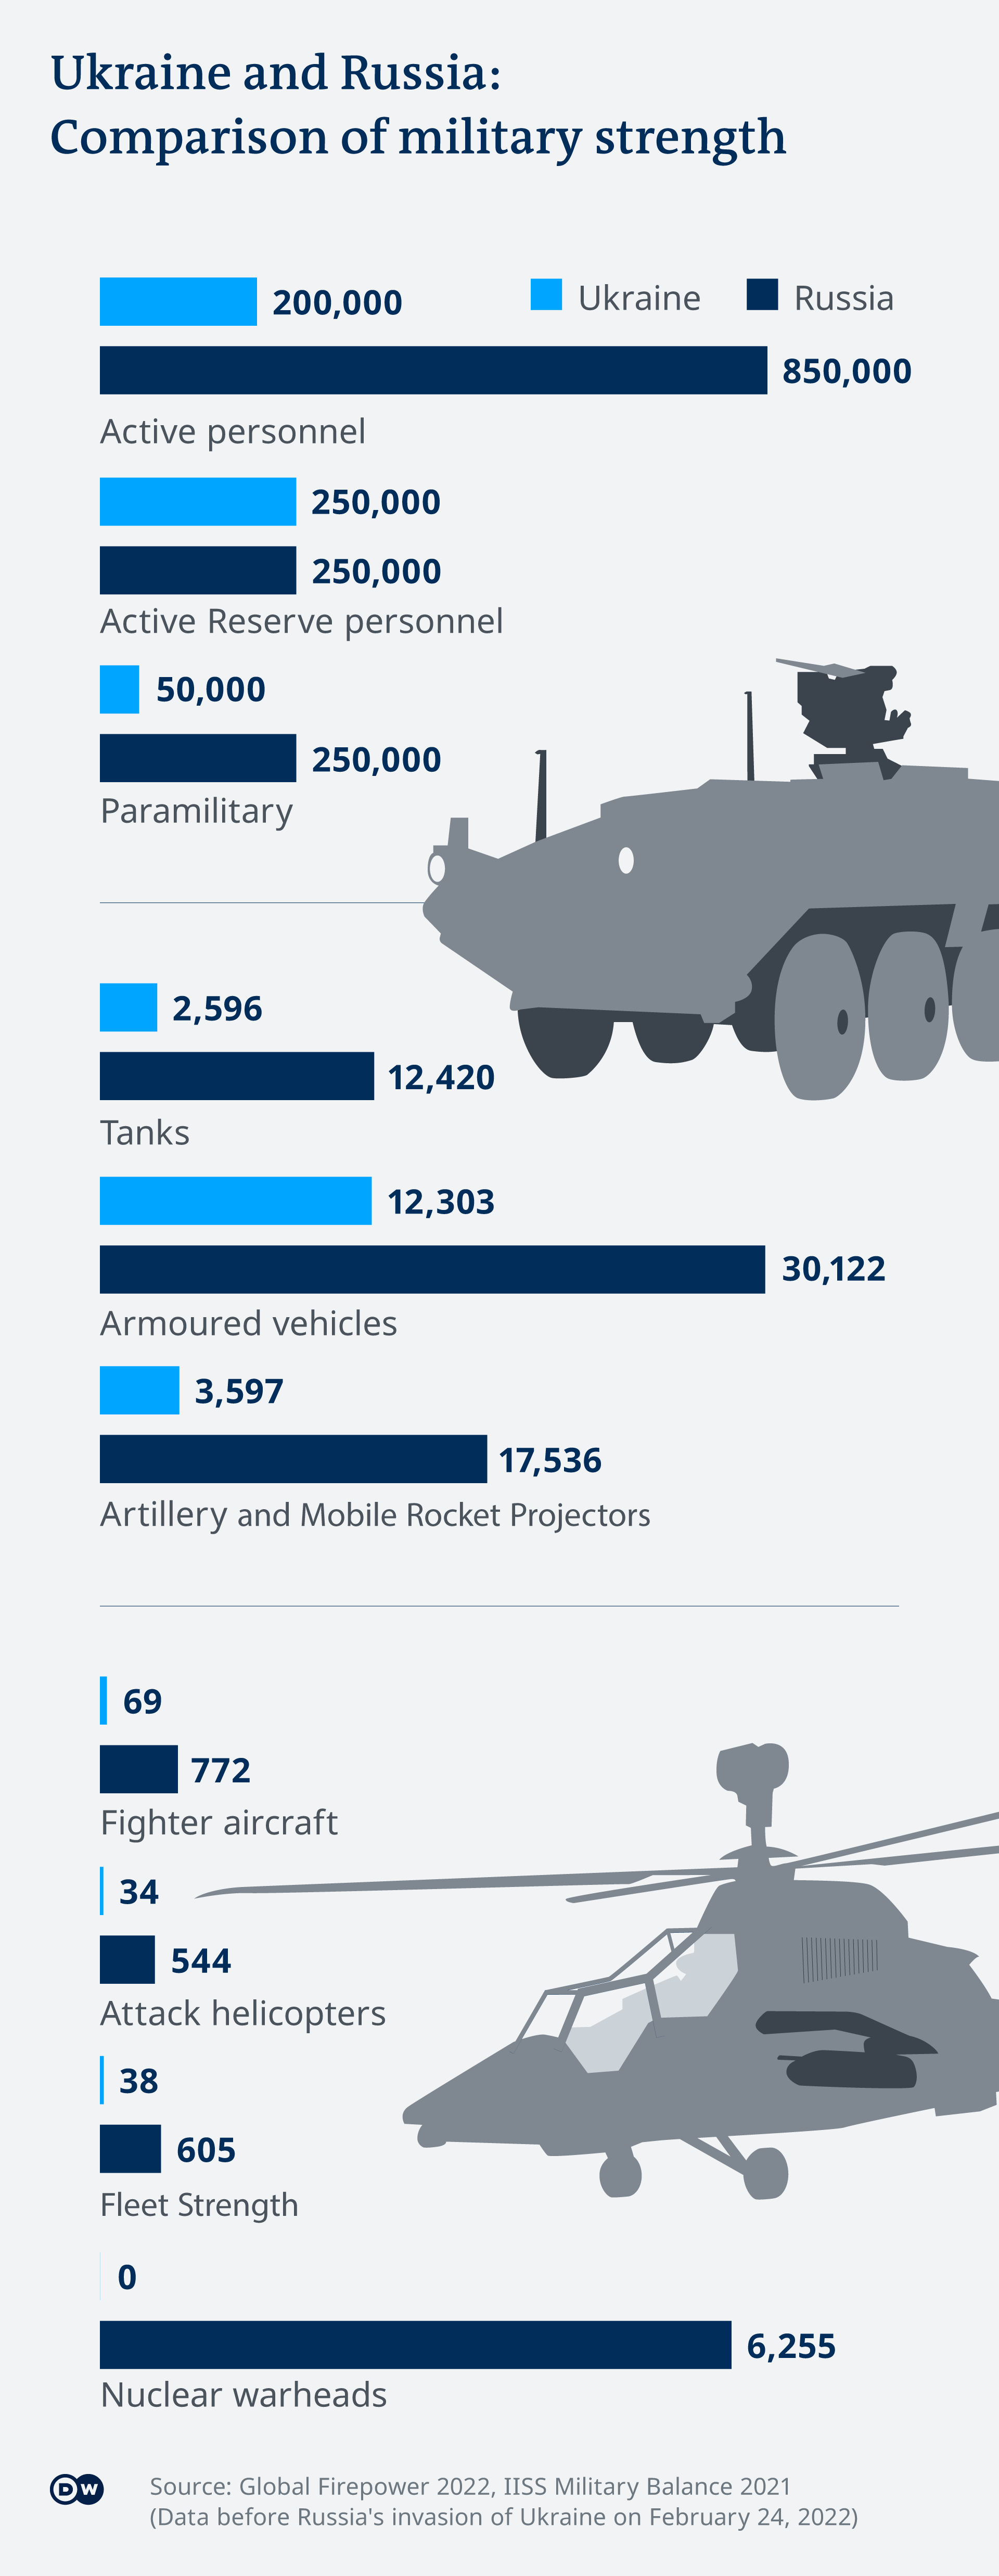 Comparison of Ukrainian and Russian military strength